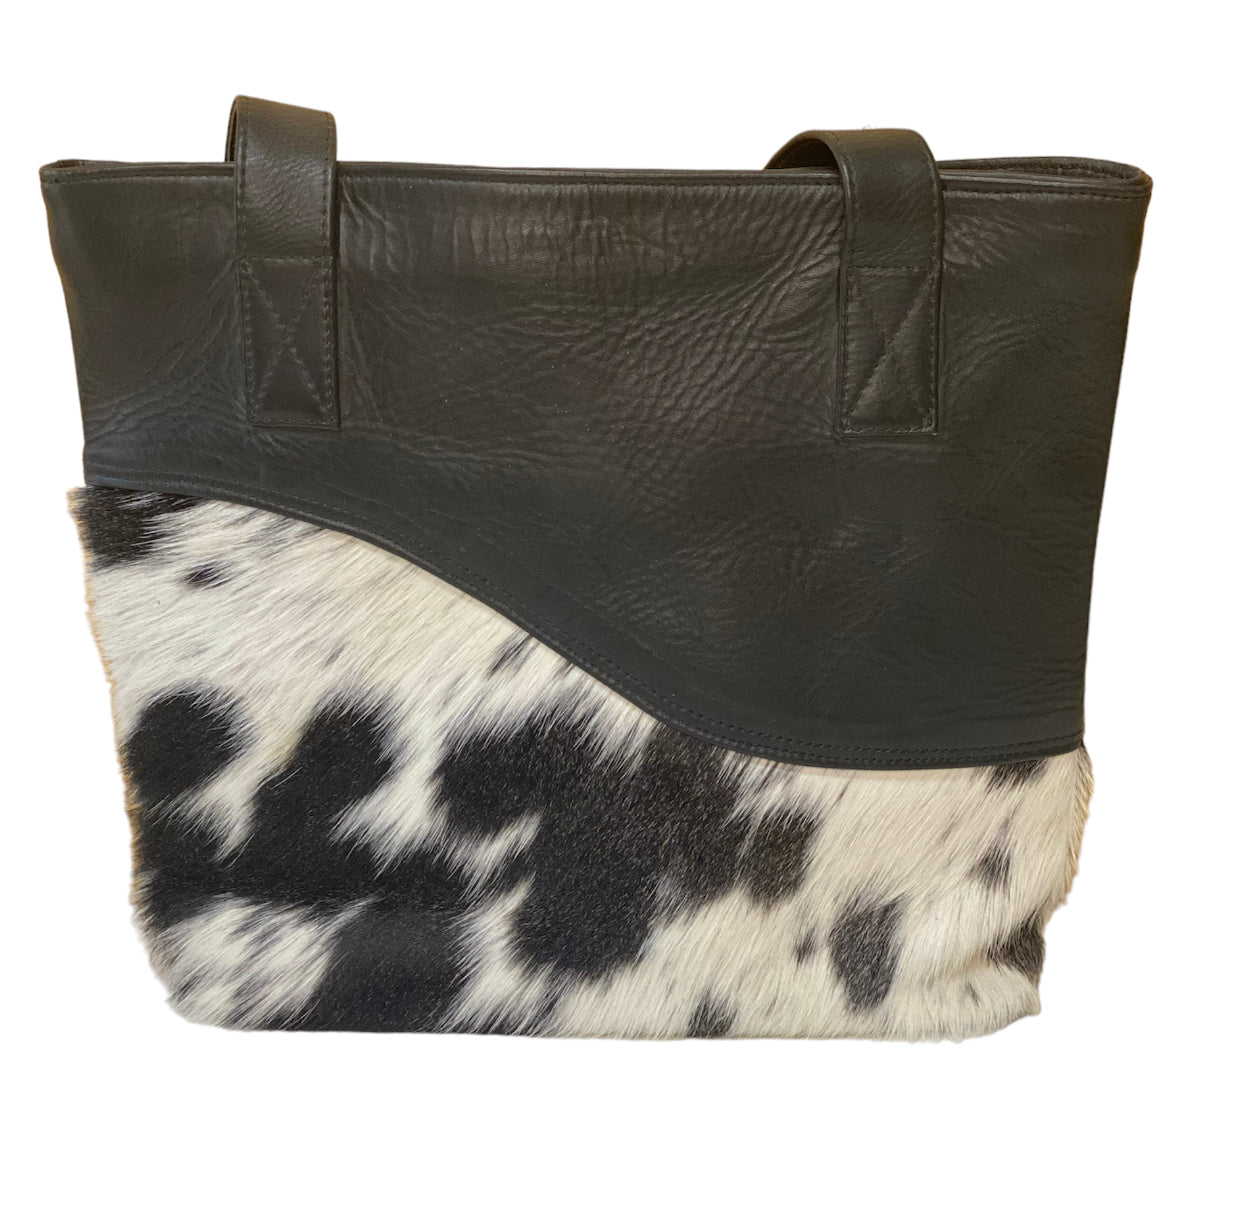 A8128 - 1/2 Hair-On Cowhide Carry Tote